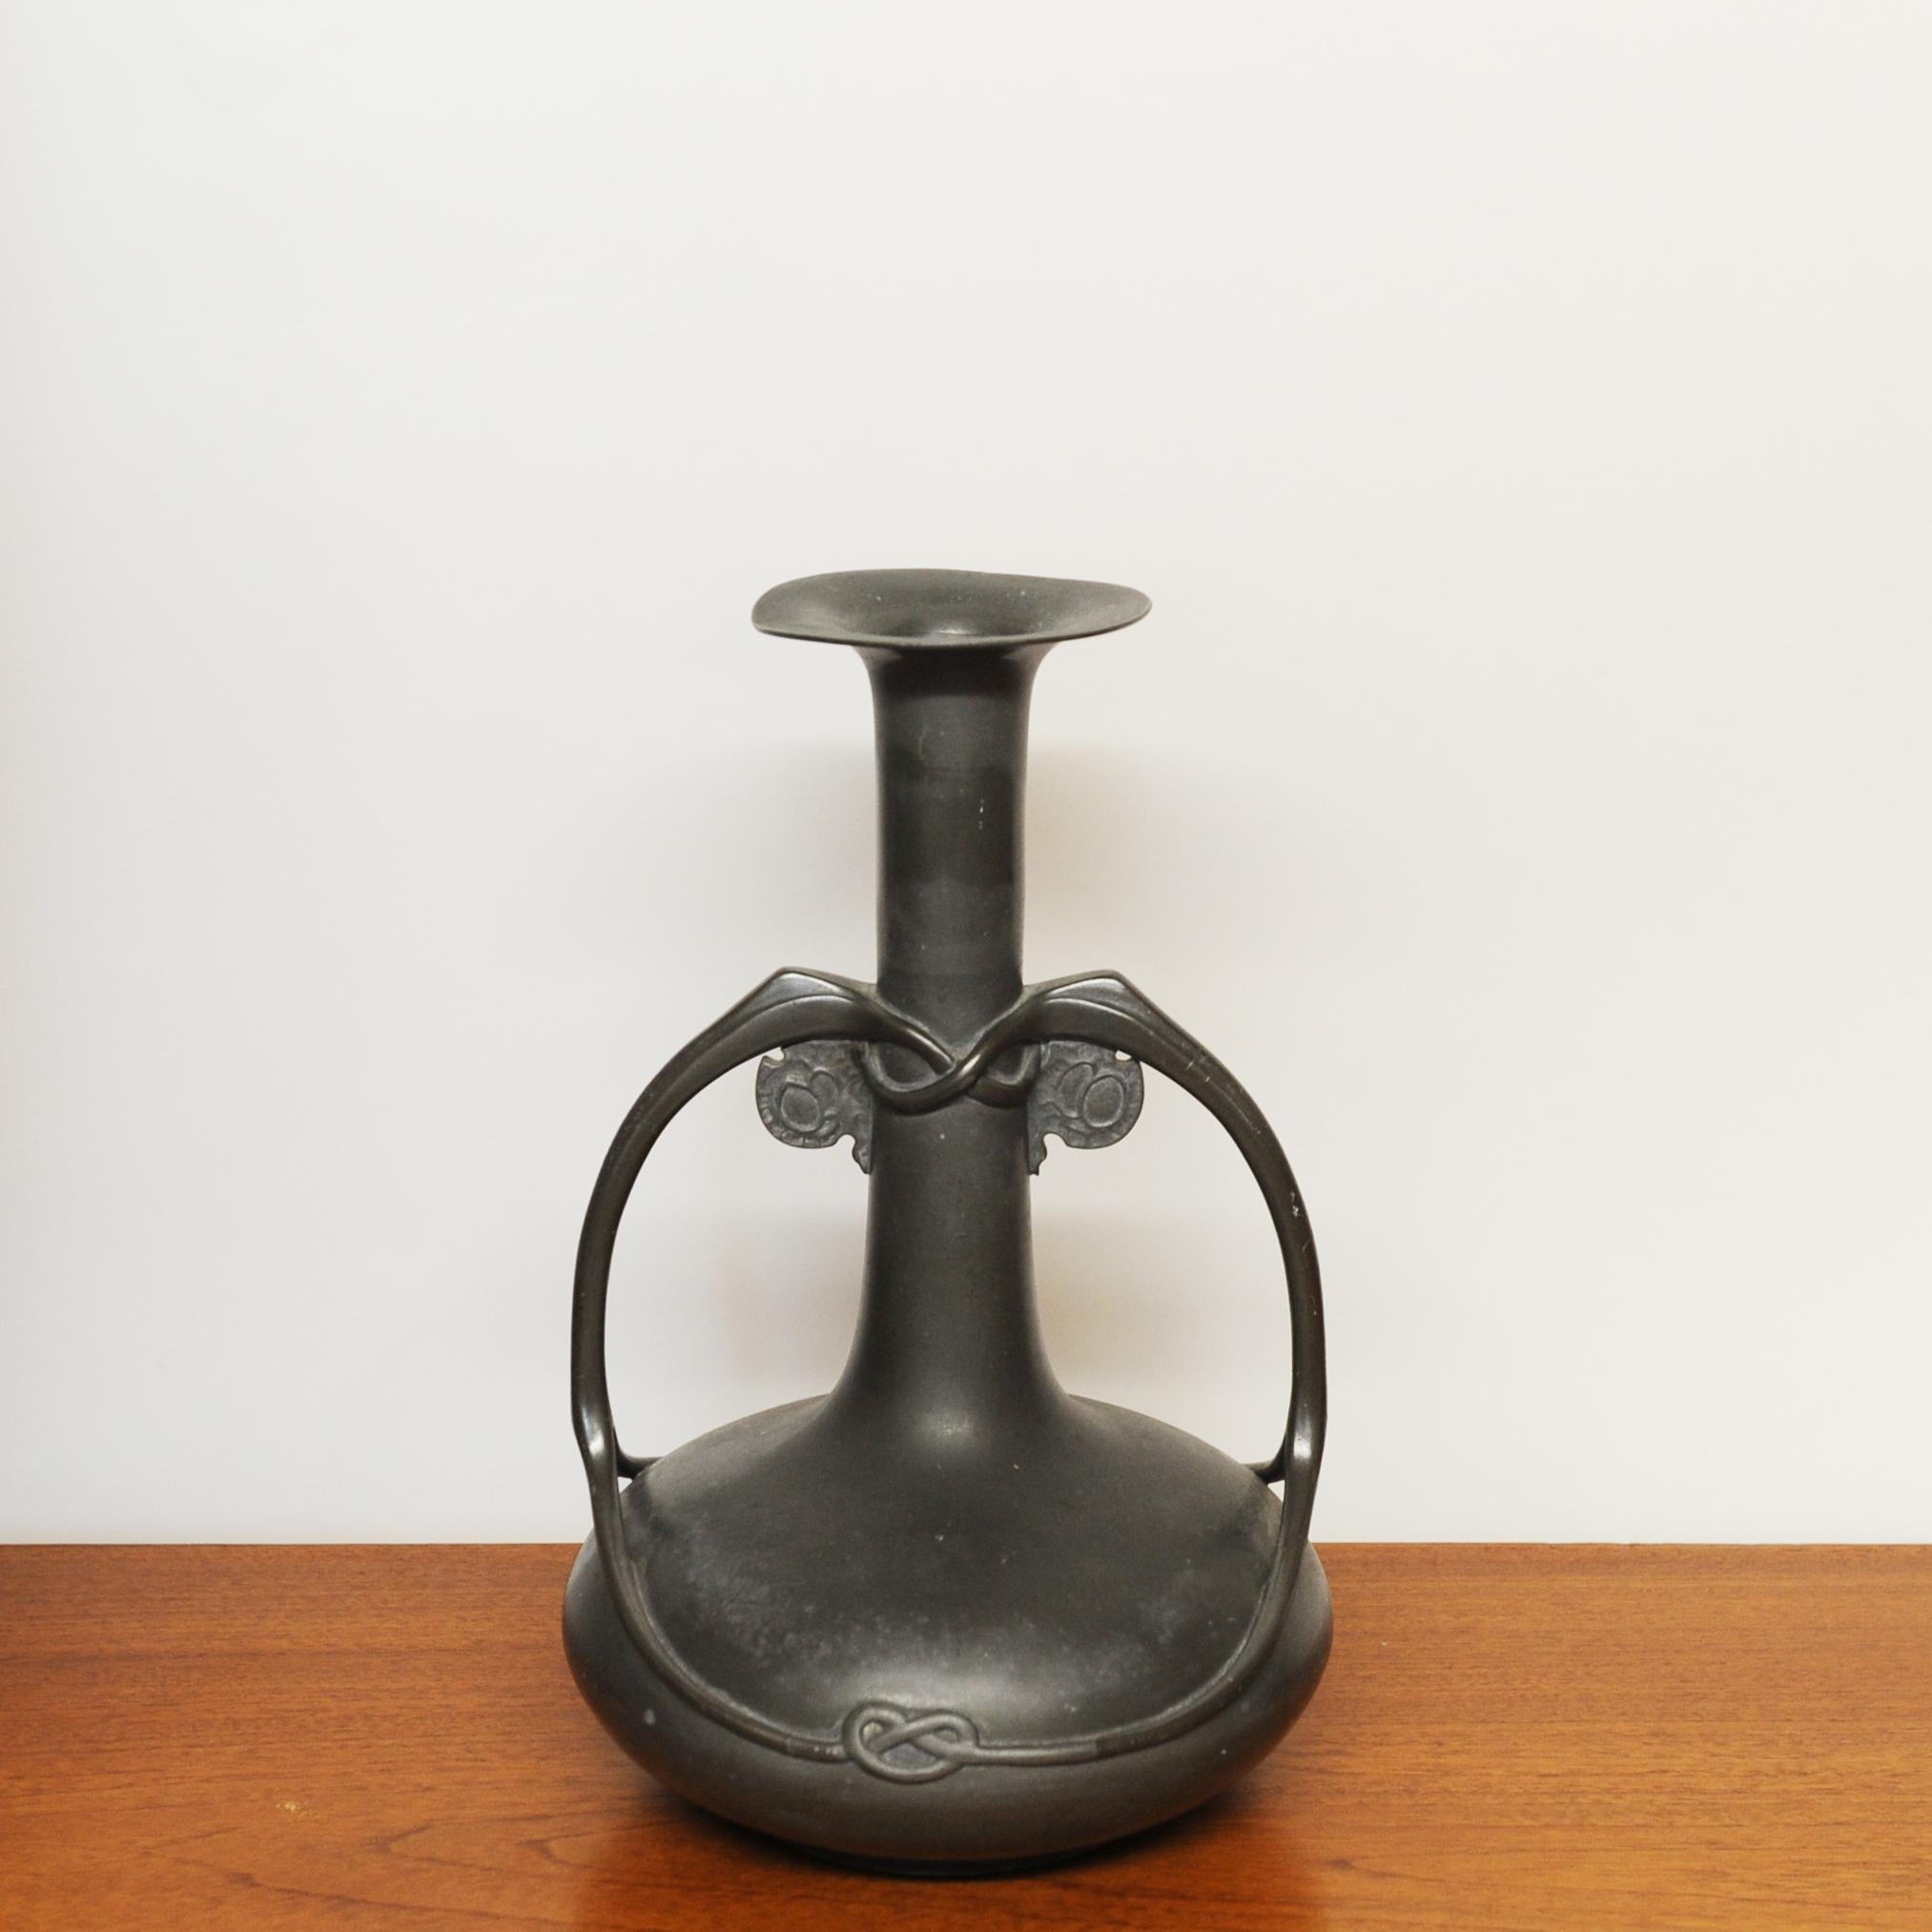 A Tudric pewter twin handled vase with a tall cylindrical neck and everted rim, the handles of sinuous organic form fashioned with Celtic entrelac motifs.

Stamped - TUDRIC 0214

Designer - Archibald Knox

Design Period - 1900 to 1909

Style - Art